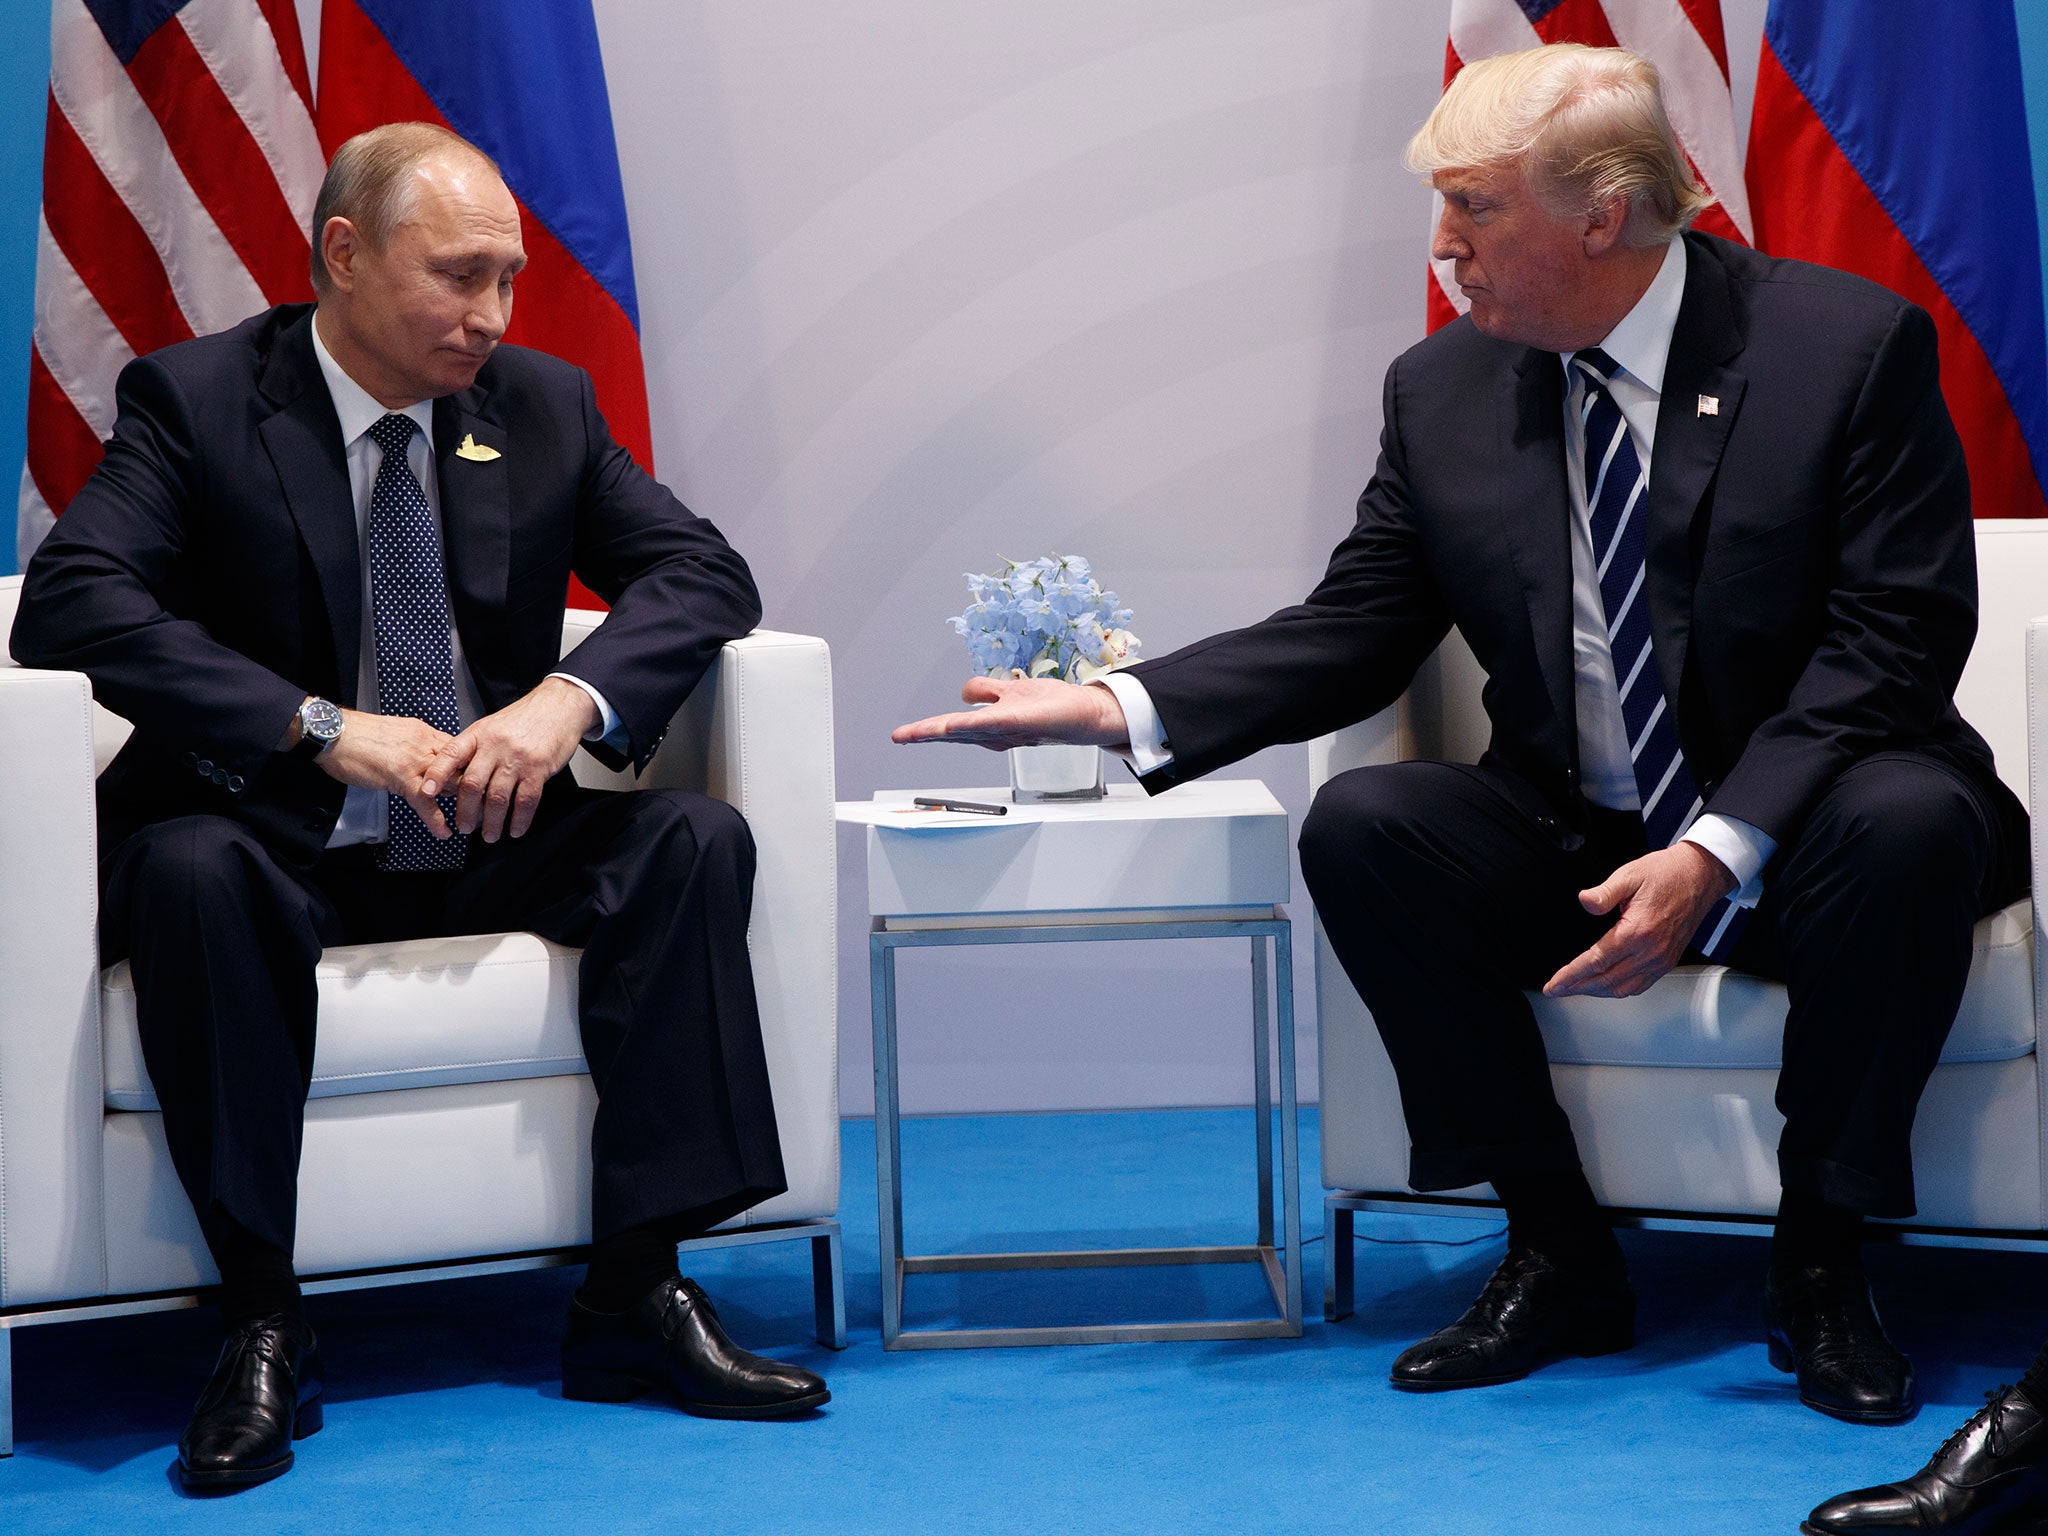 Donald Trump held a meeting with President Putin for over two hours at the G20 summit